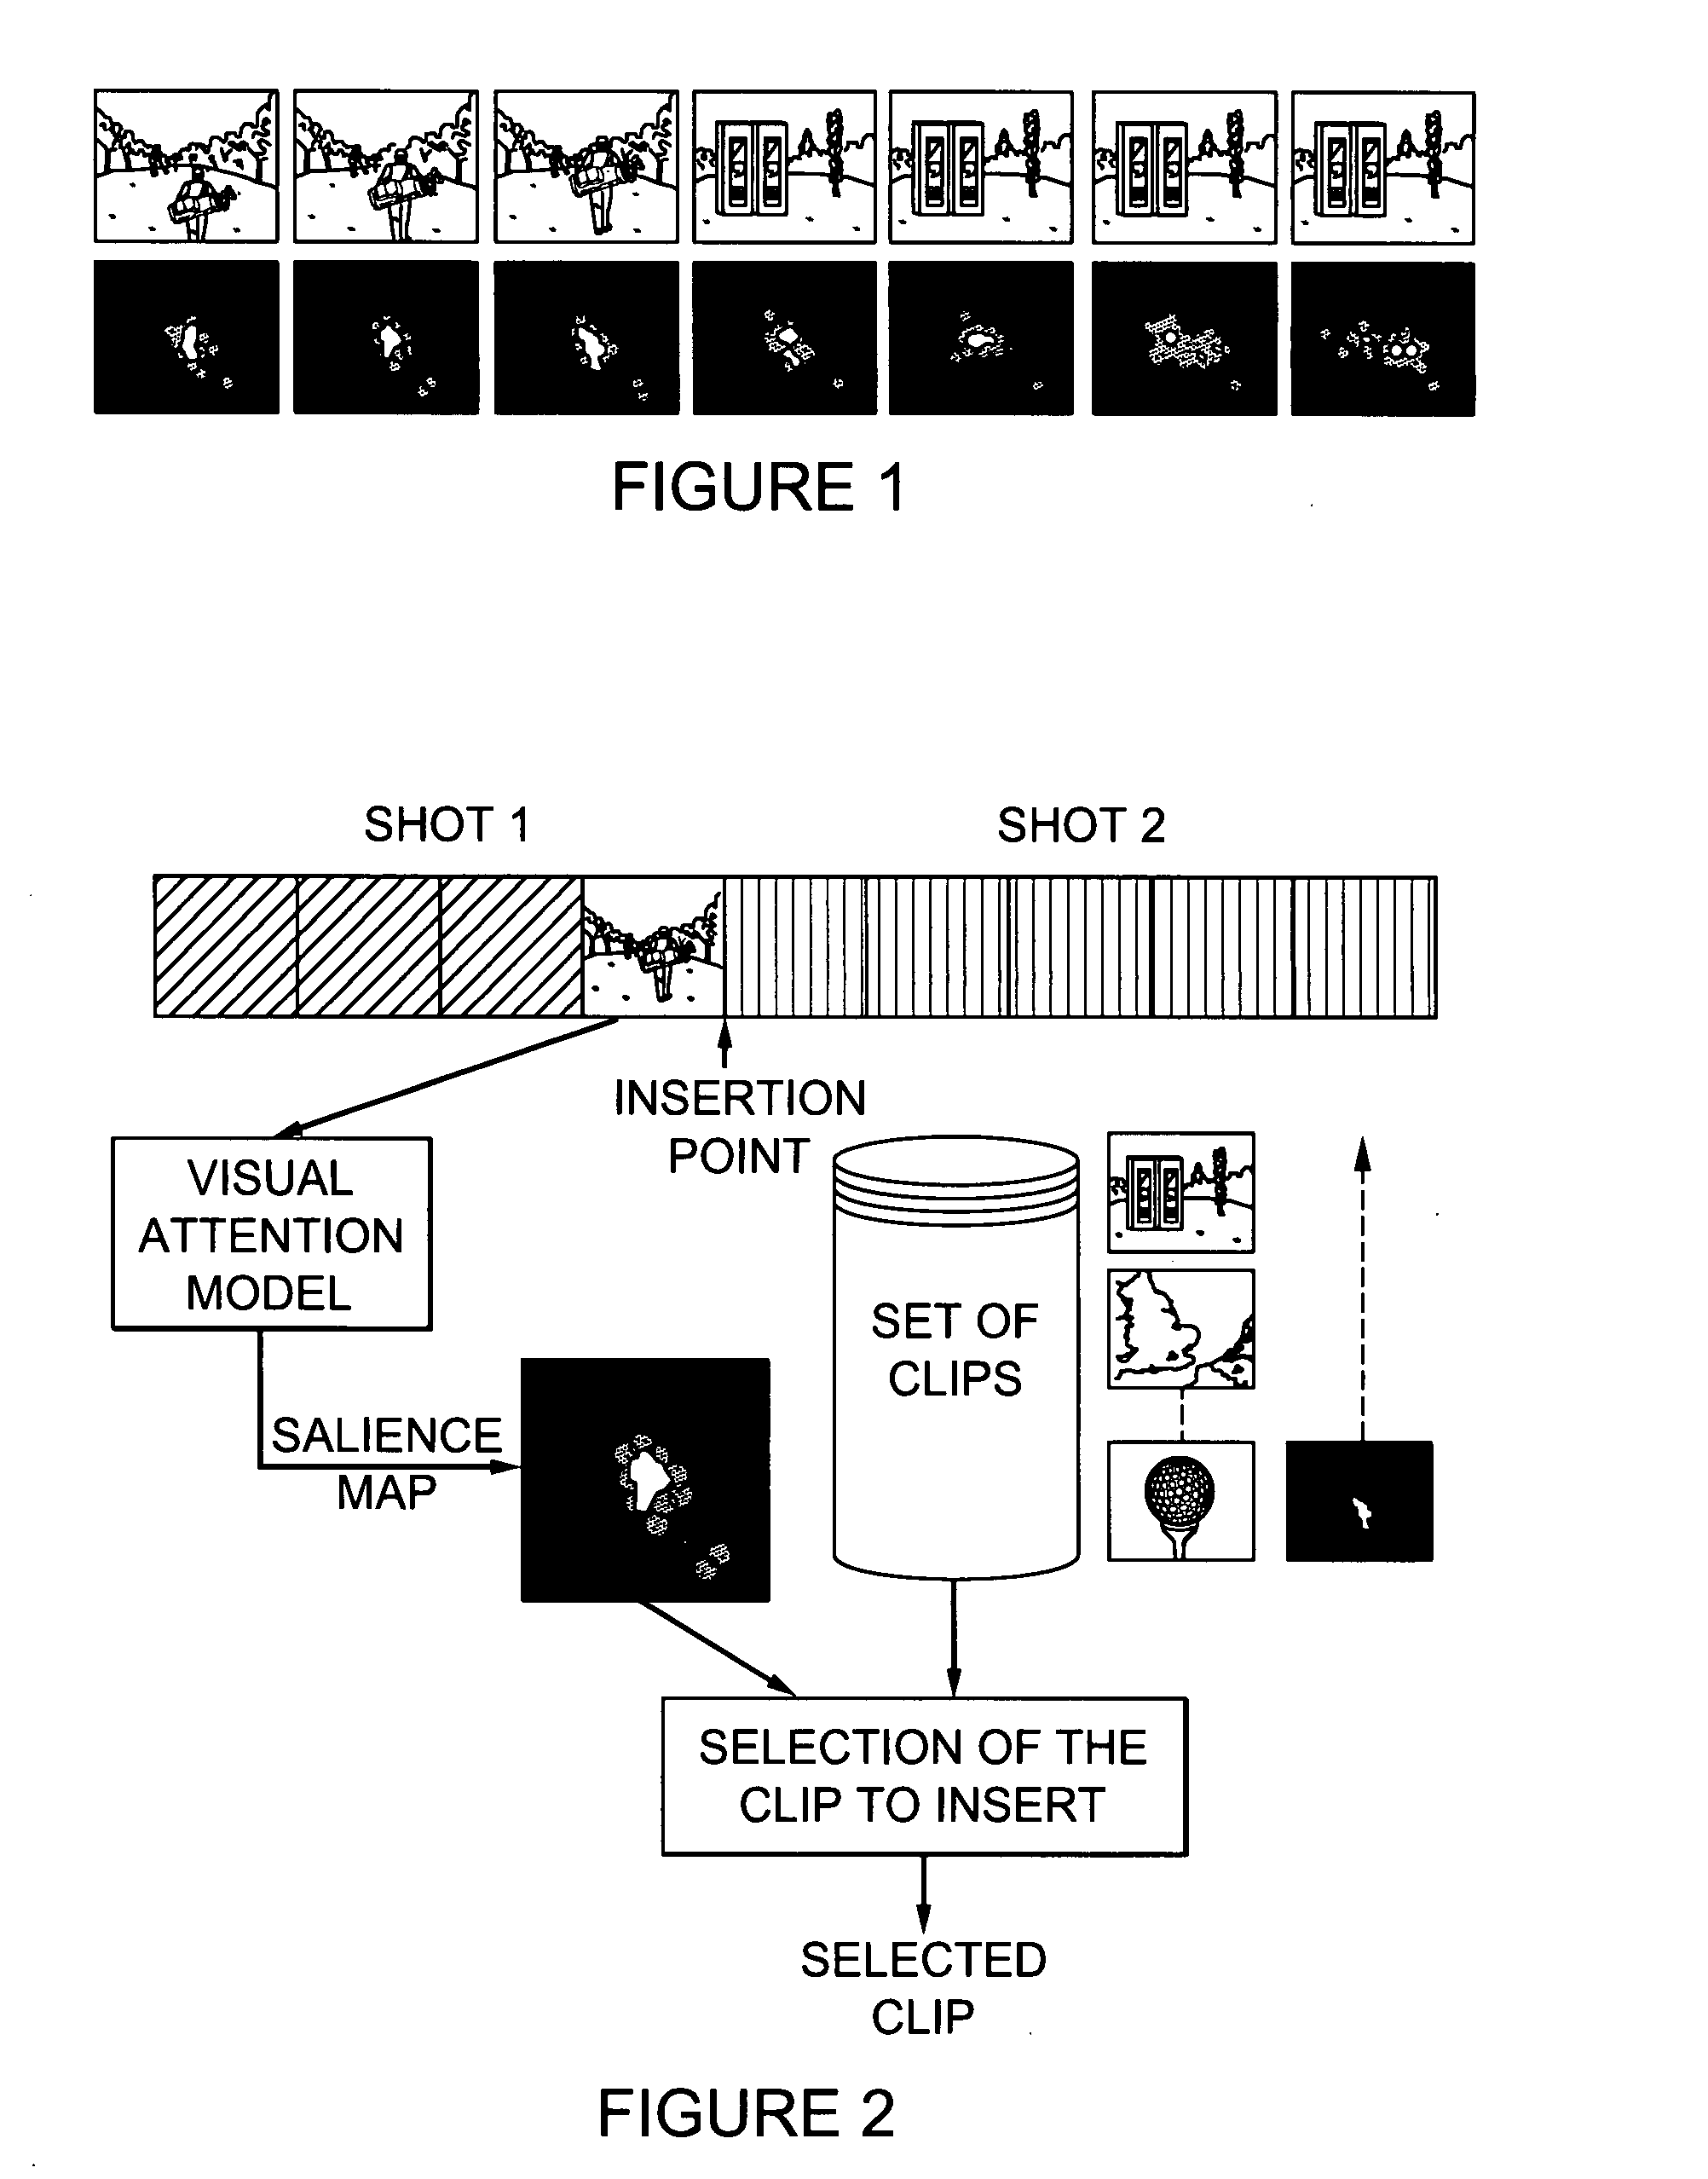 Method for inserting an advertising clip into a video sequence and corresponding device